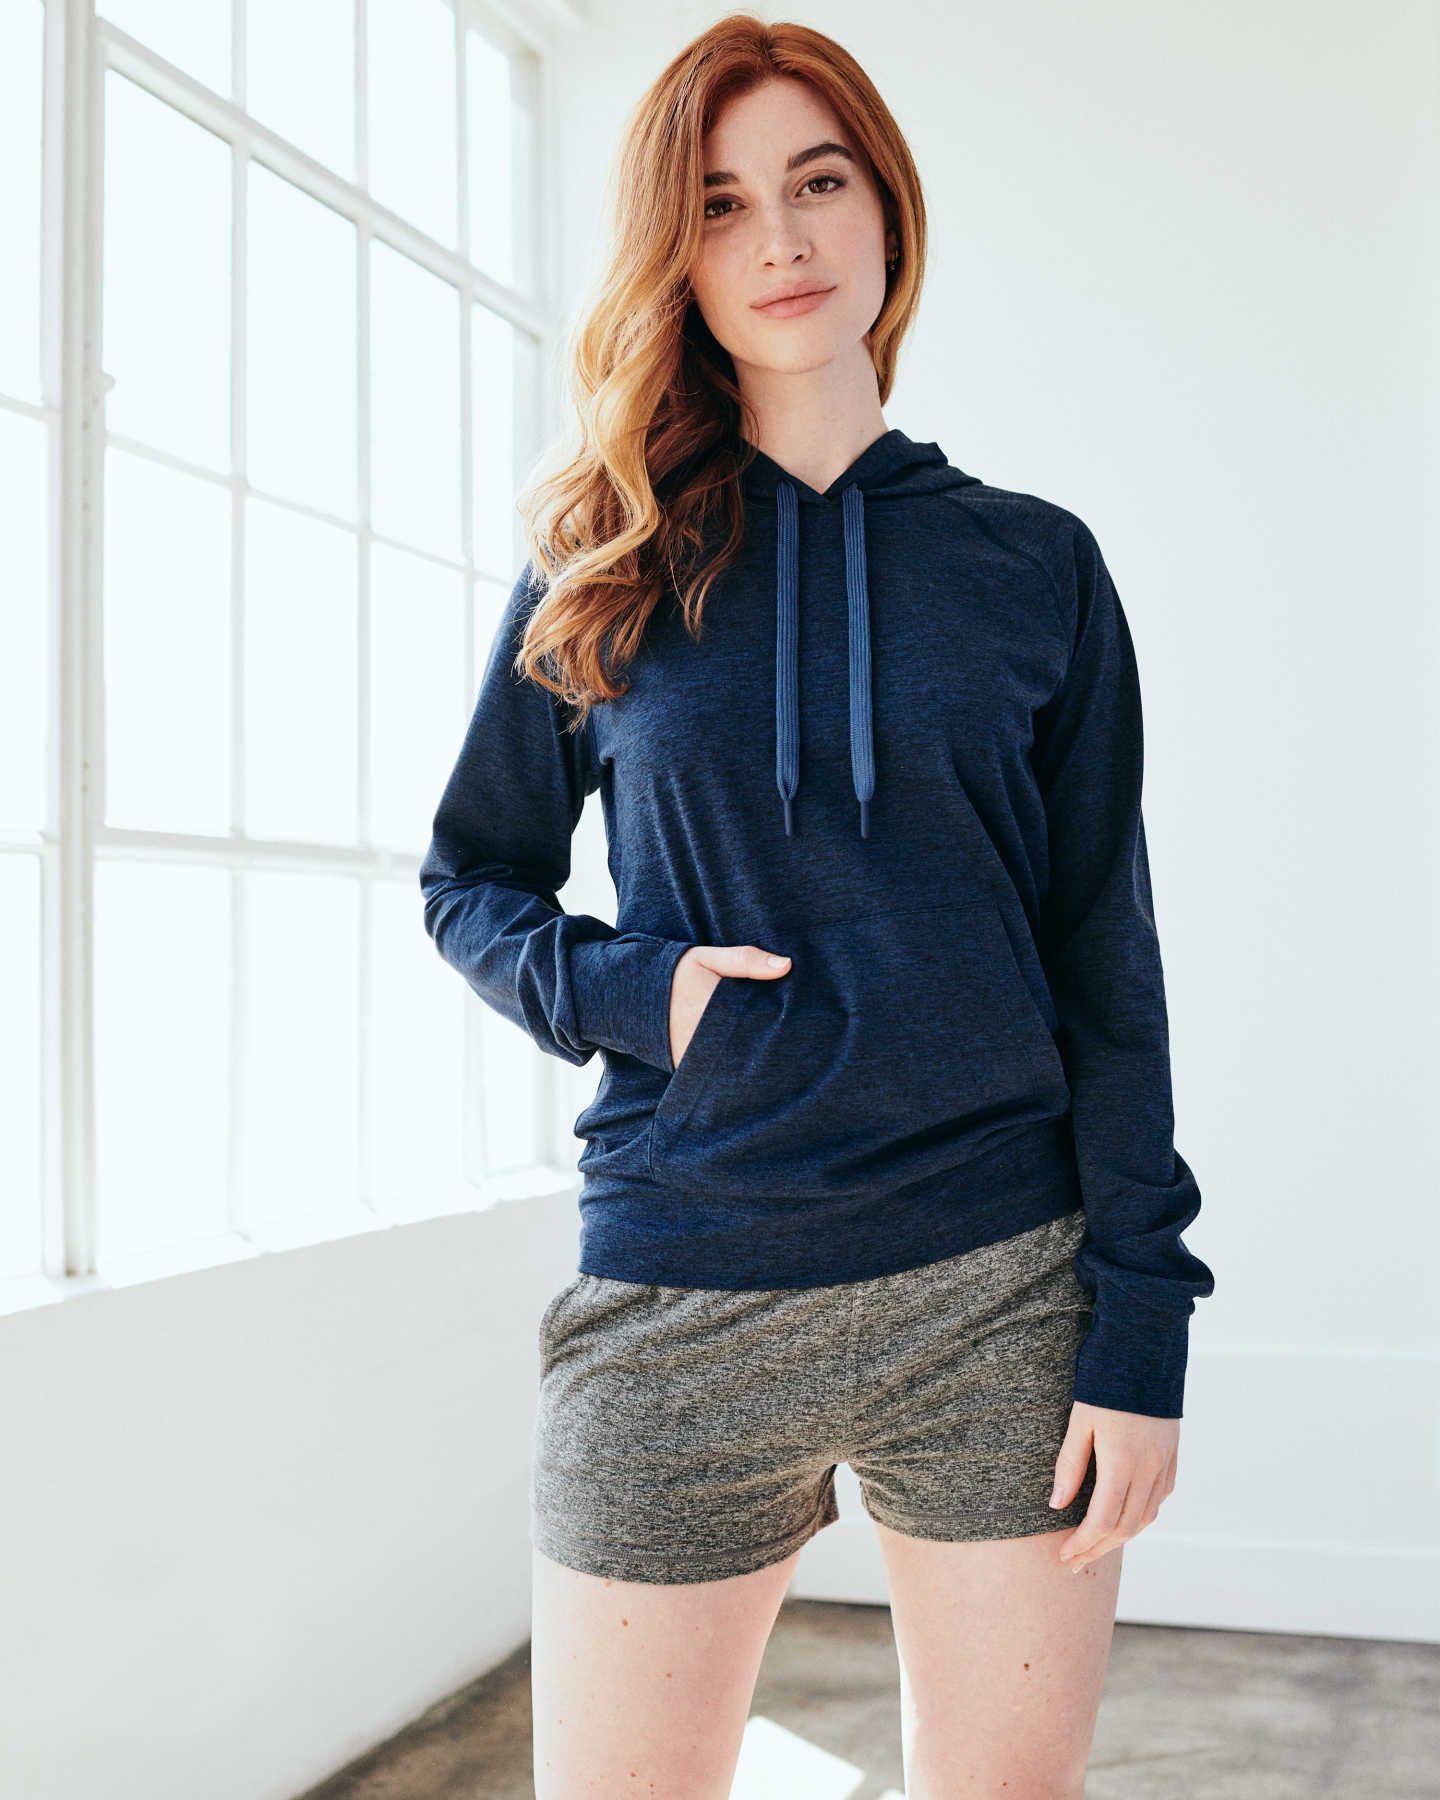 Flowknit Ultra-Soft Performance Pullover Hoodie - Navy